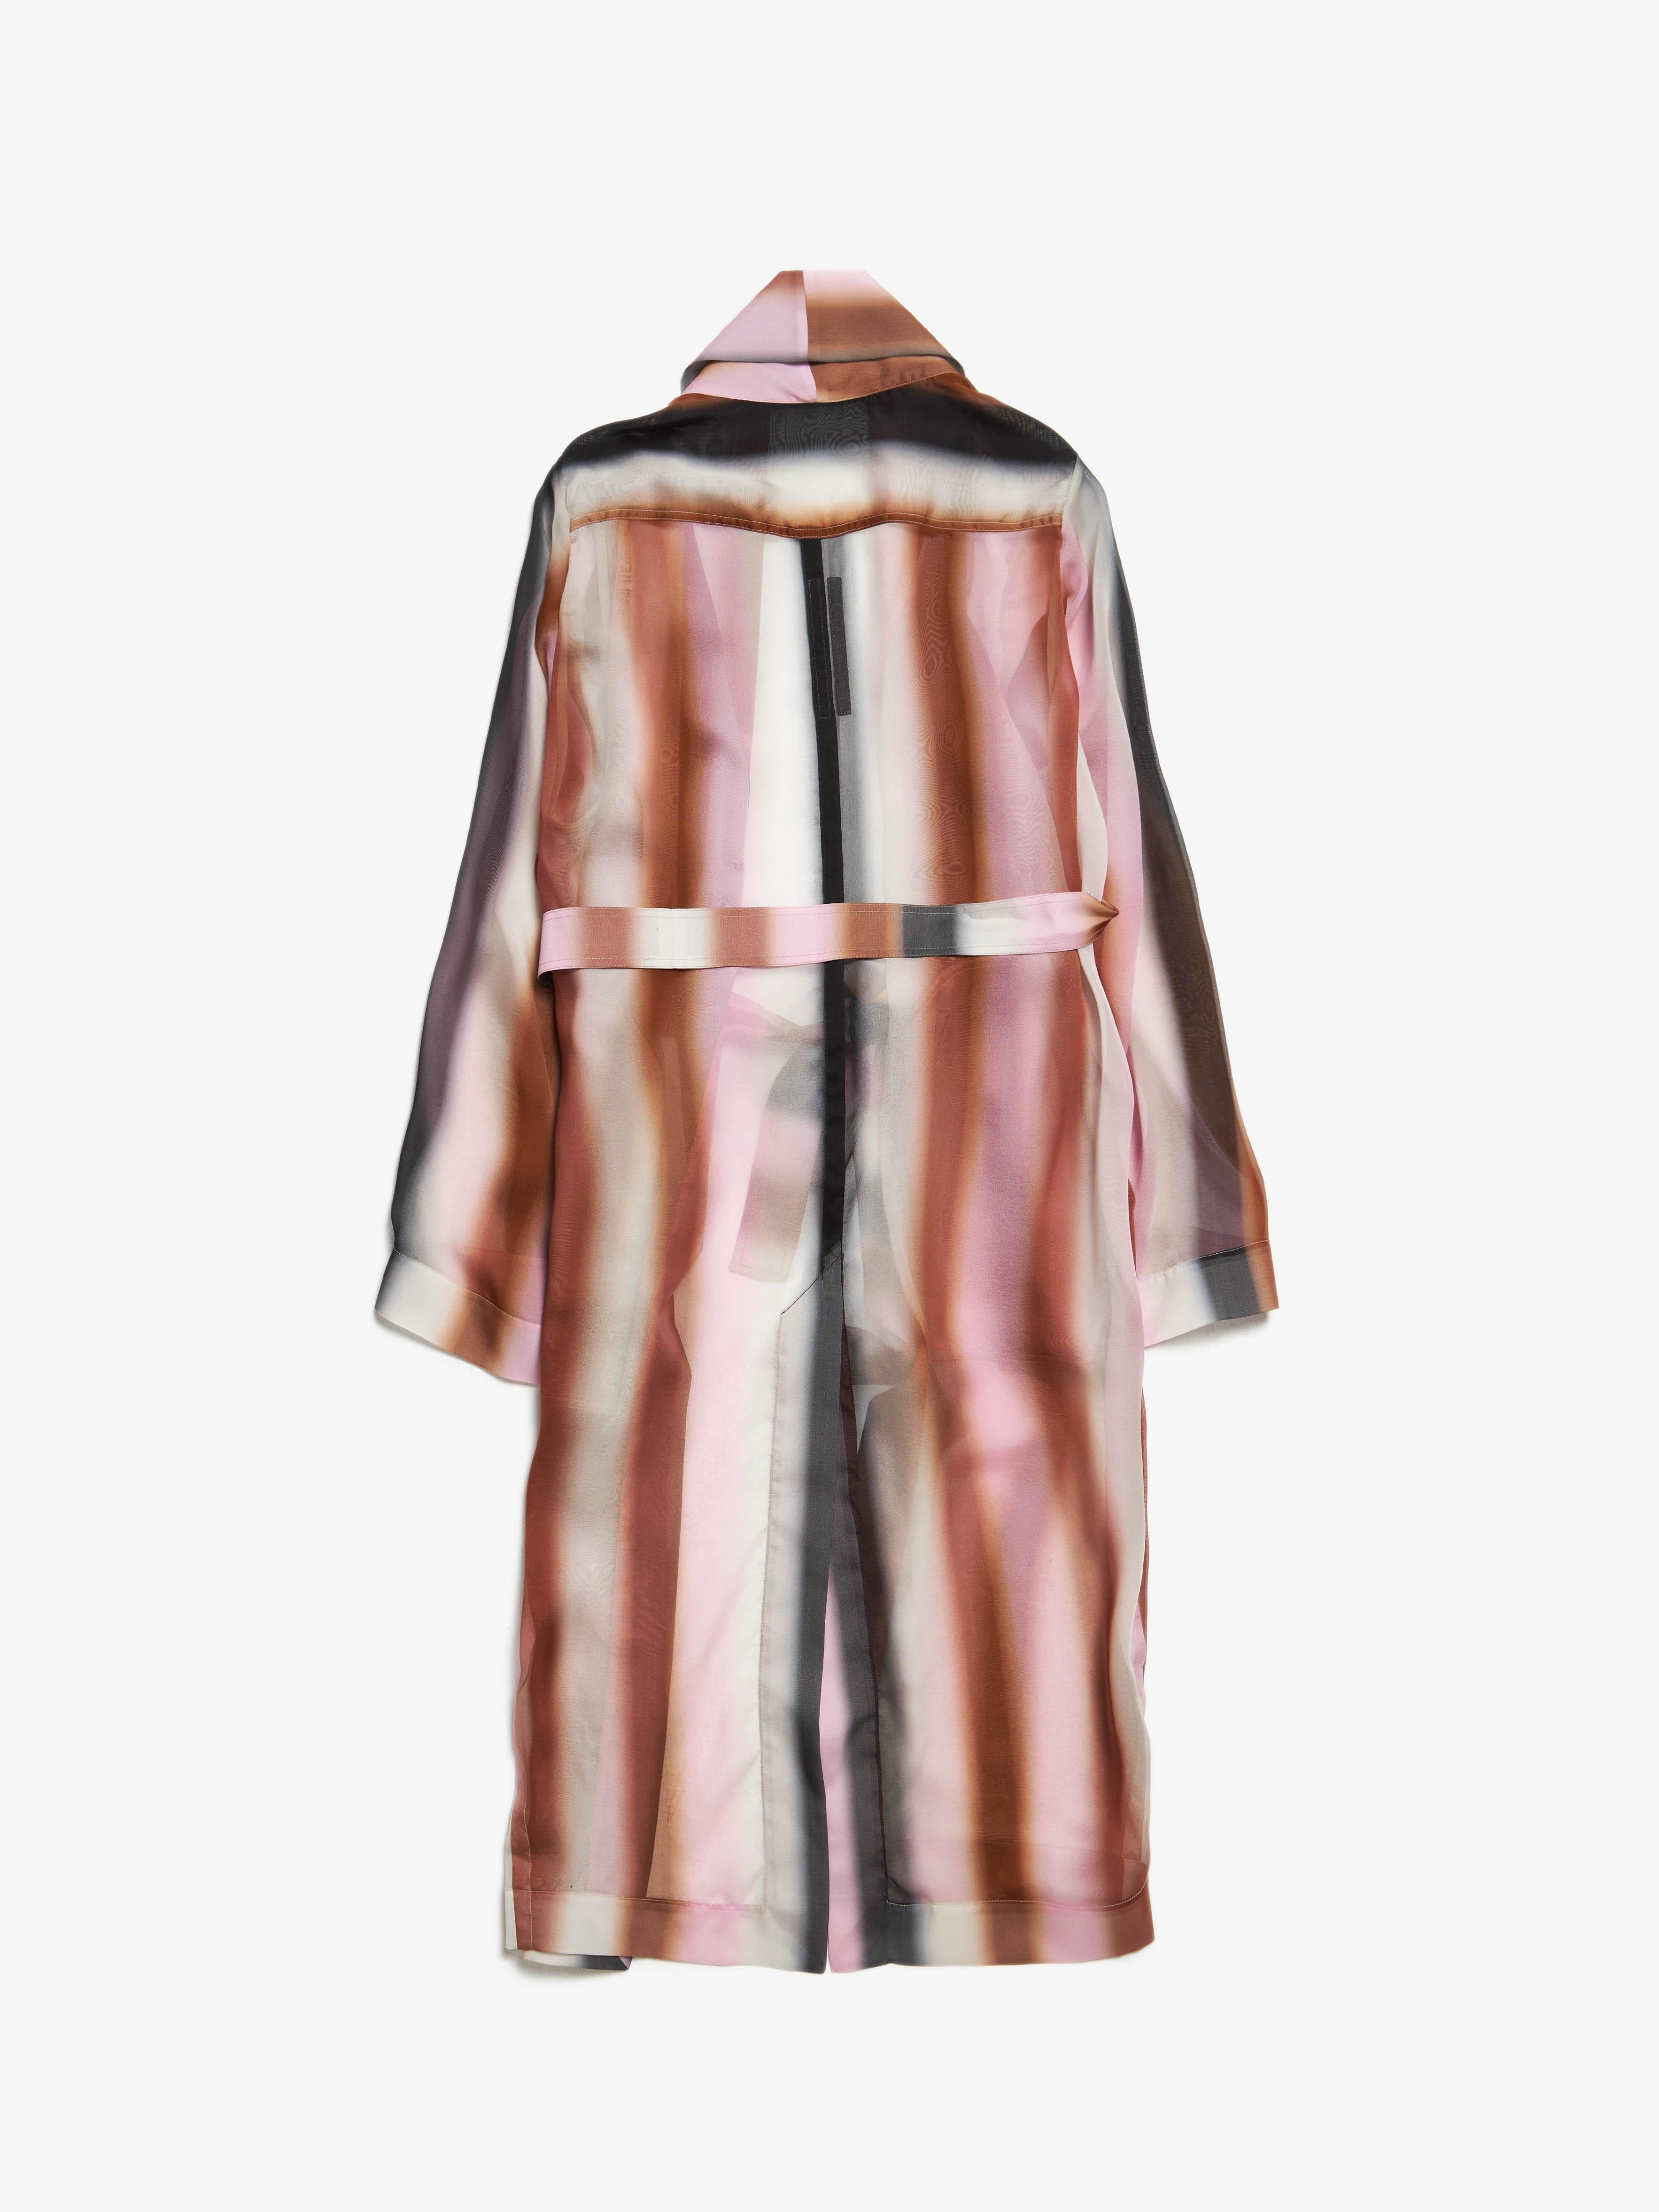 Rick Owens  SS21 Phlegethon Hued Degrade Printed Silk Robe In New Condition For Sale In Dover, DE